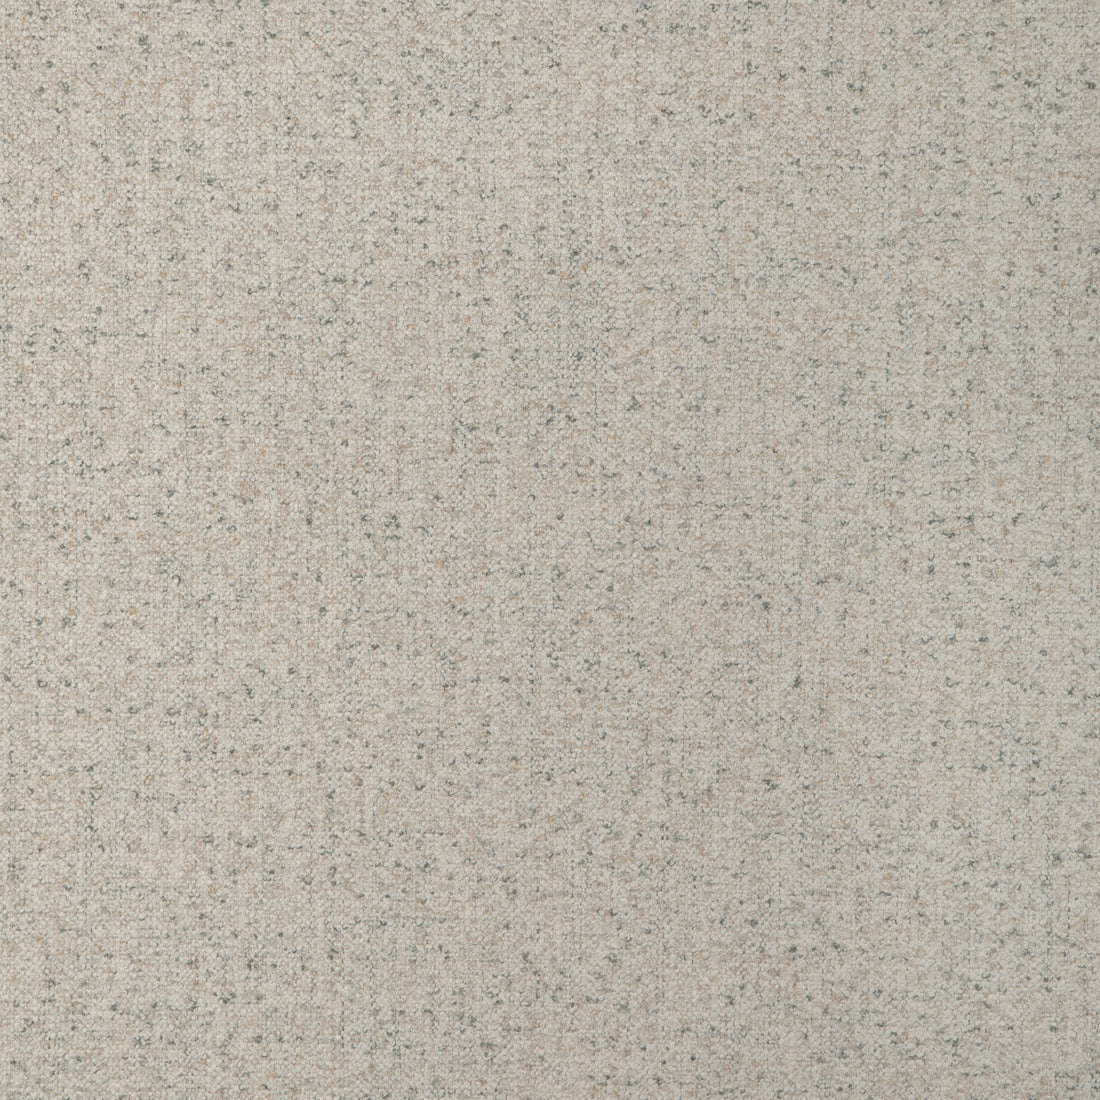 Subtle Boucle fabric in pebble color - pattern 36835.516.0 - by Kravet Basics in the Candice Olson collection